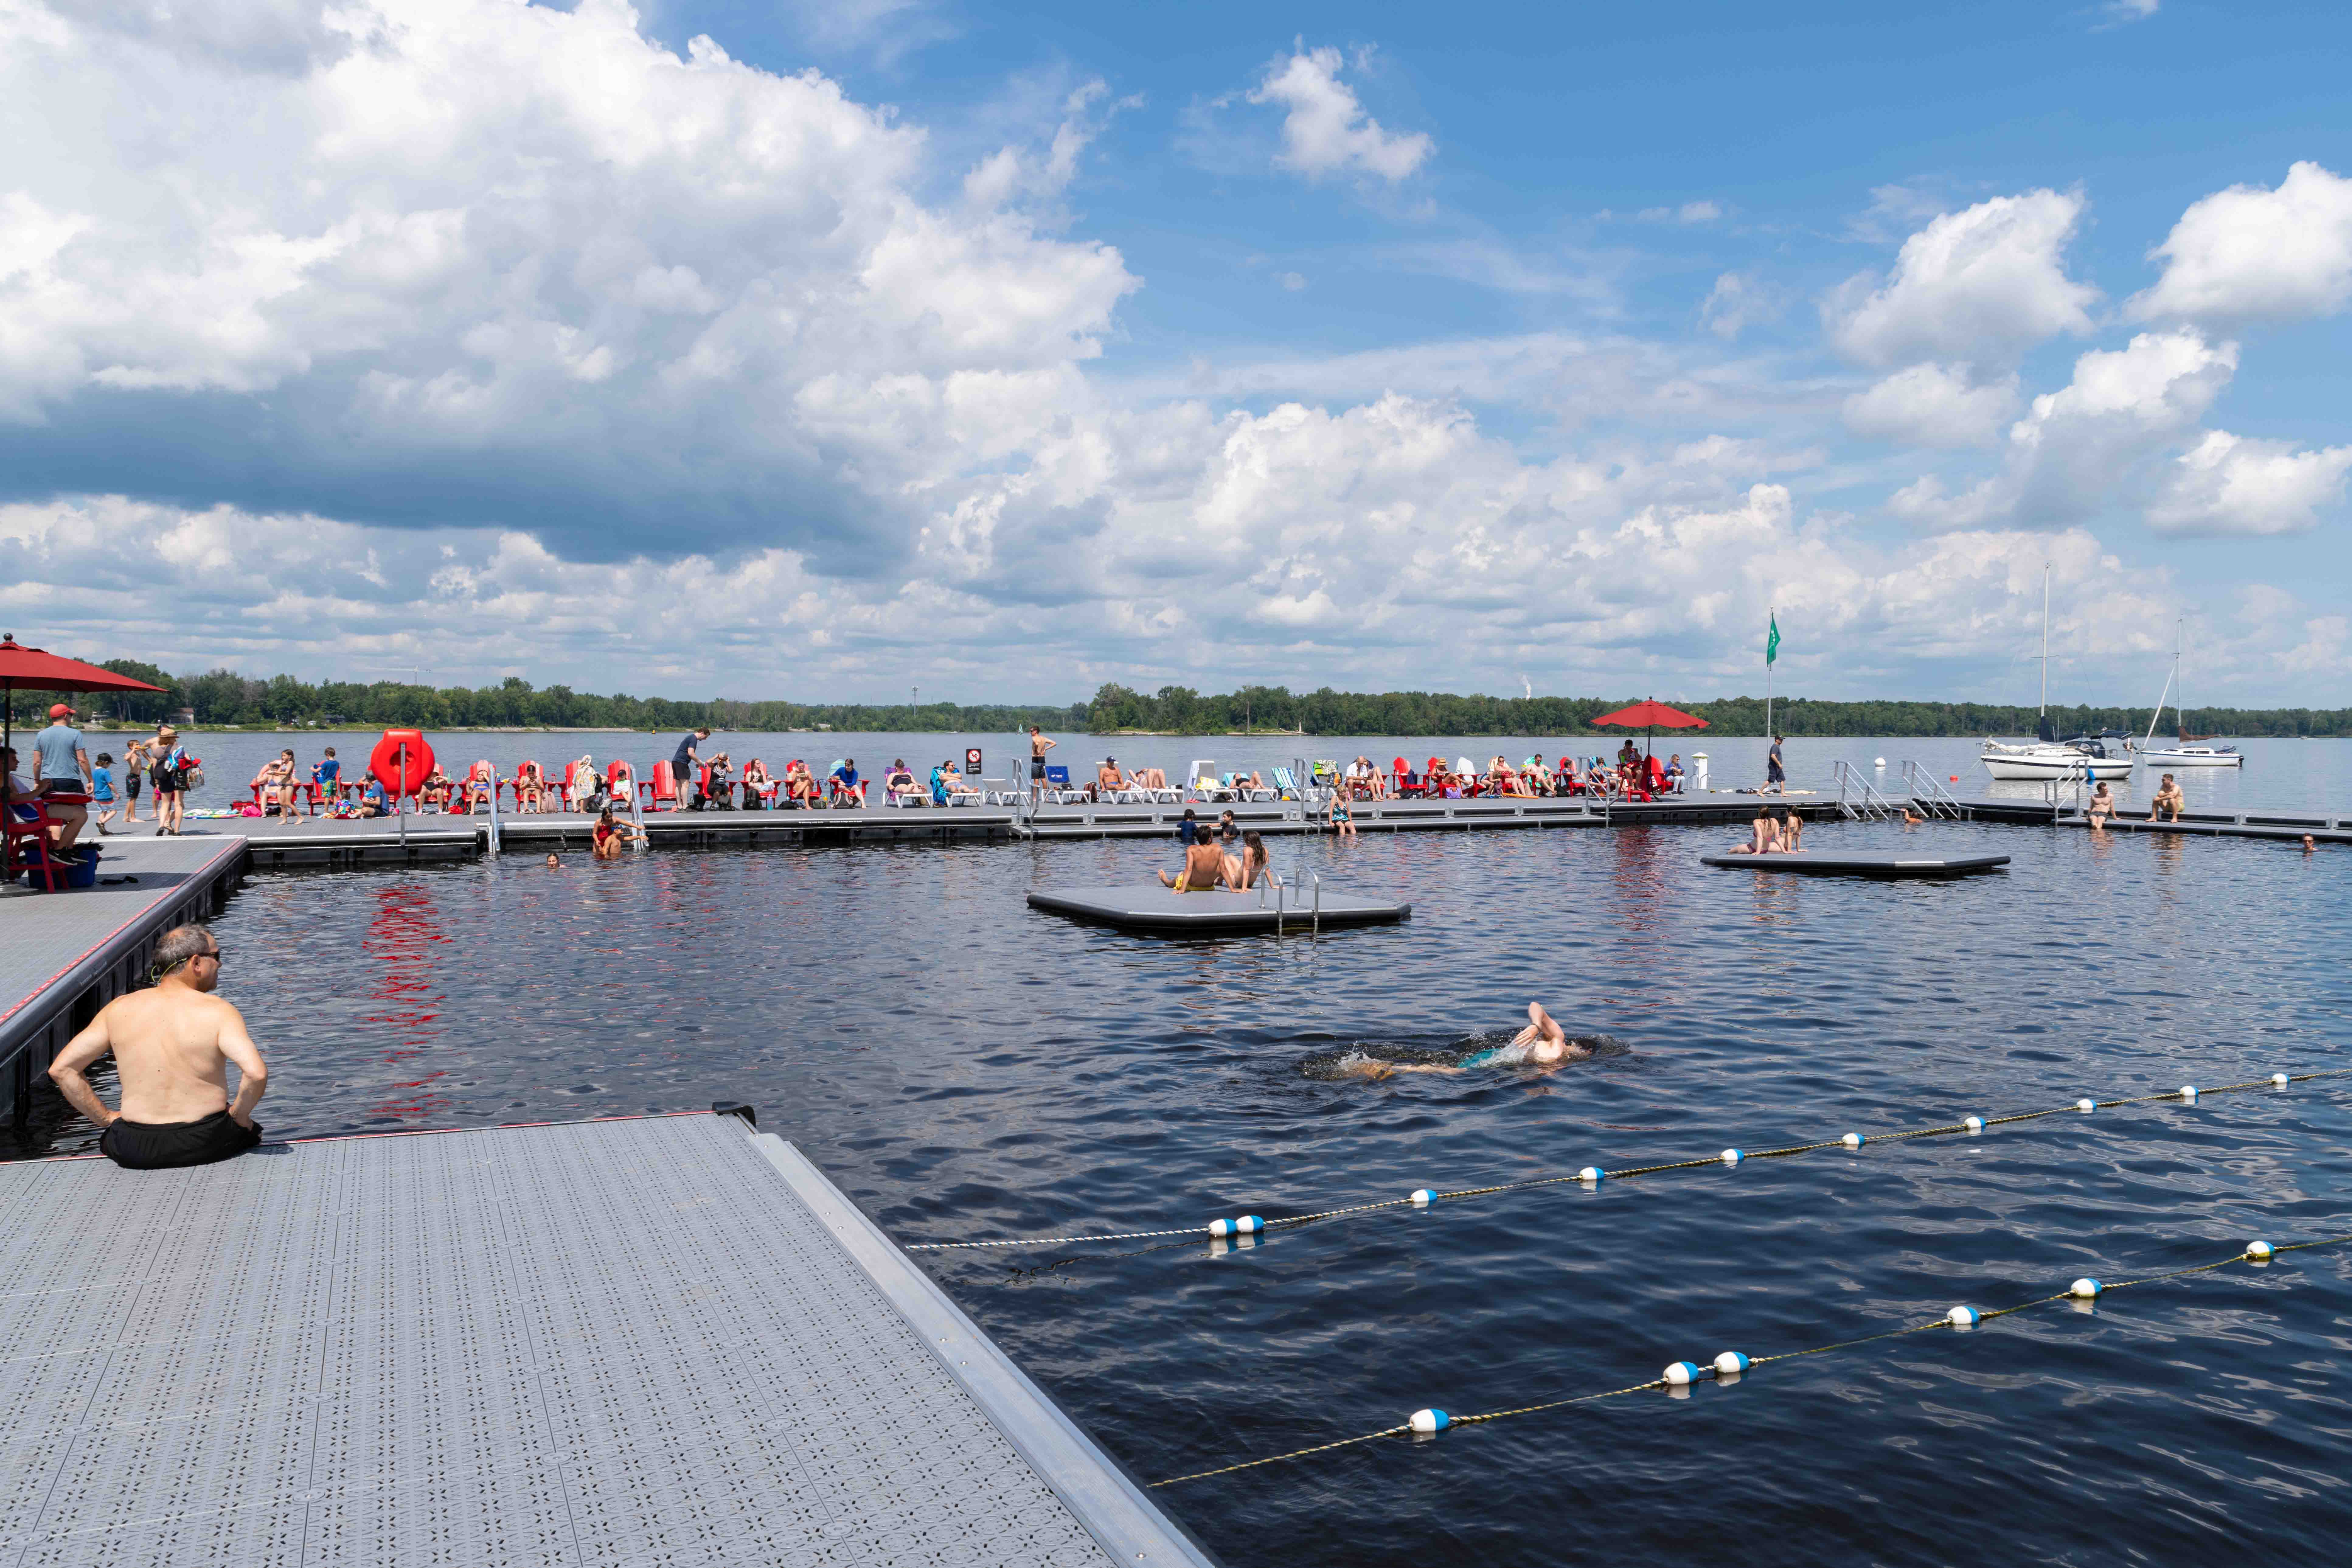 Summer continues at the National Capital Commission (NCC)’s River House. The free-swimming weekends (10 a.m. to 6 p.m. Saturdays and Sundays) have been extended until October 1–whether the warm weather does the same remains to be seen. Since adding an additional dock in July, the River House has been a popular draw. Photo: Doug Banks